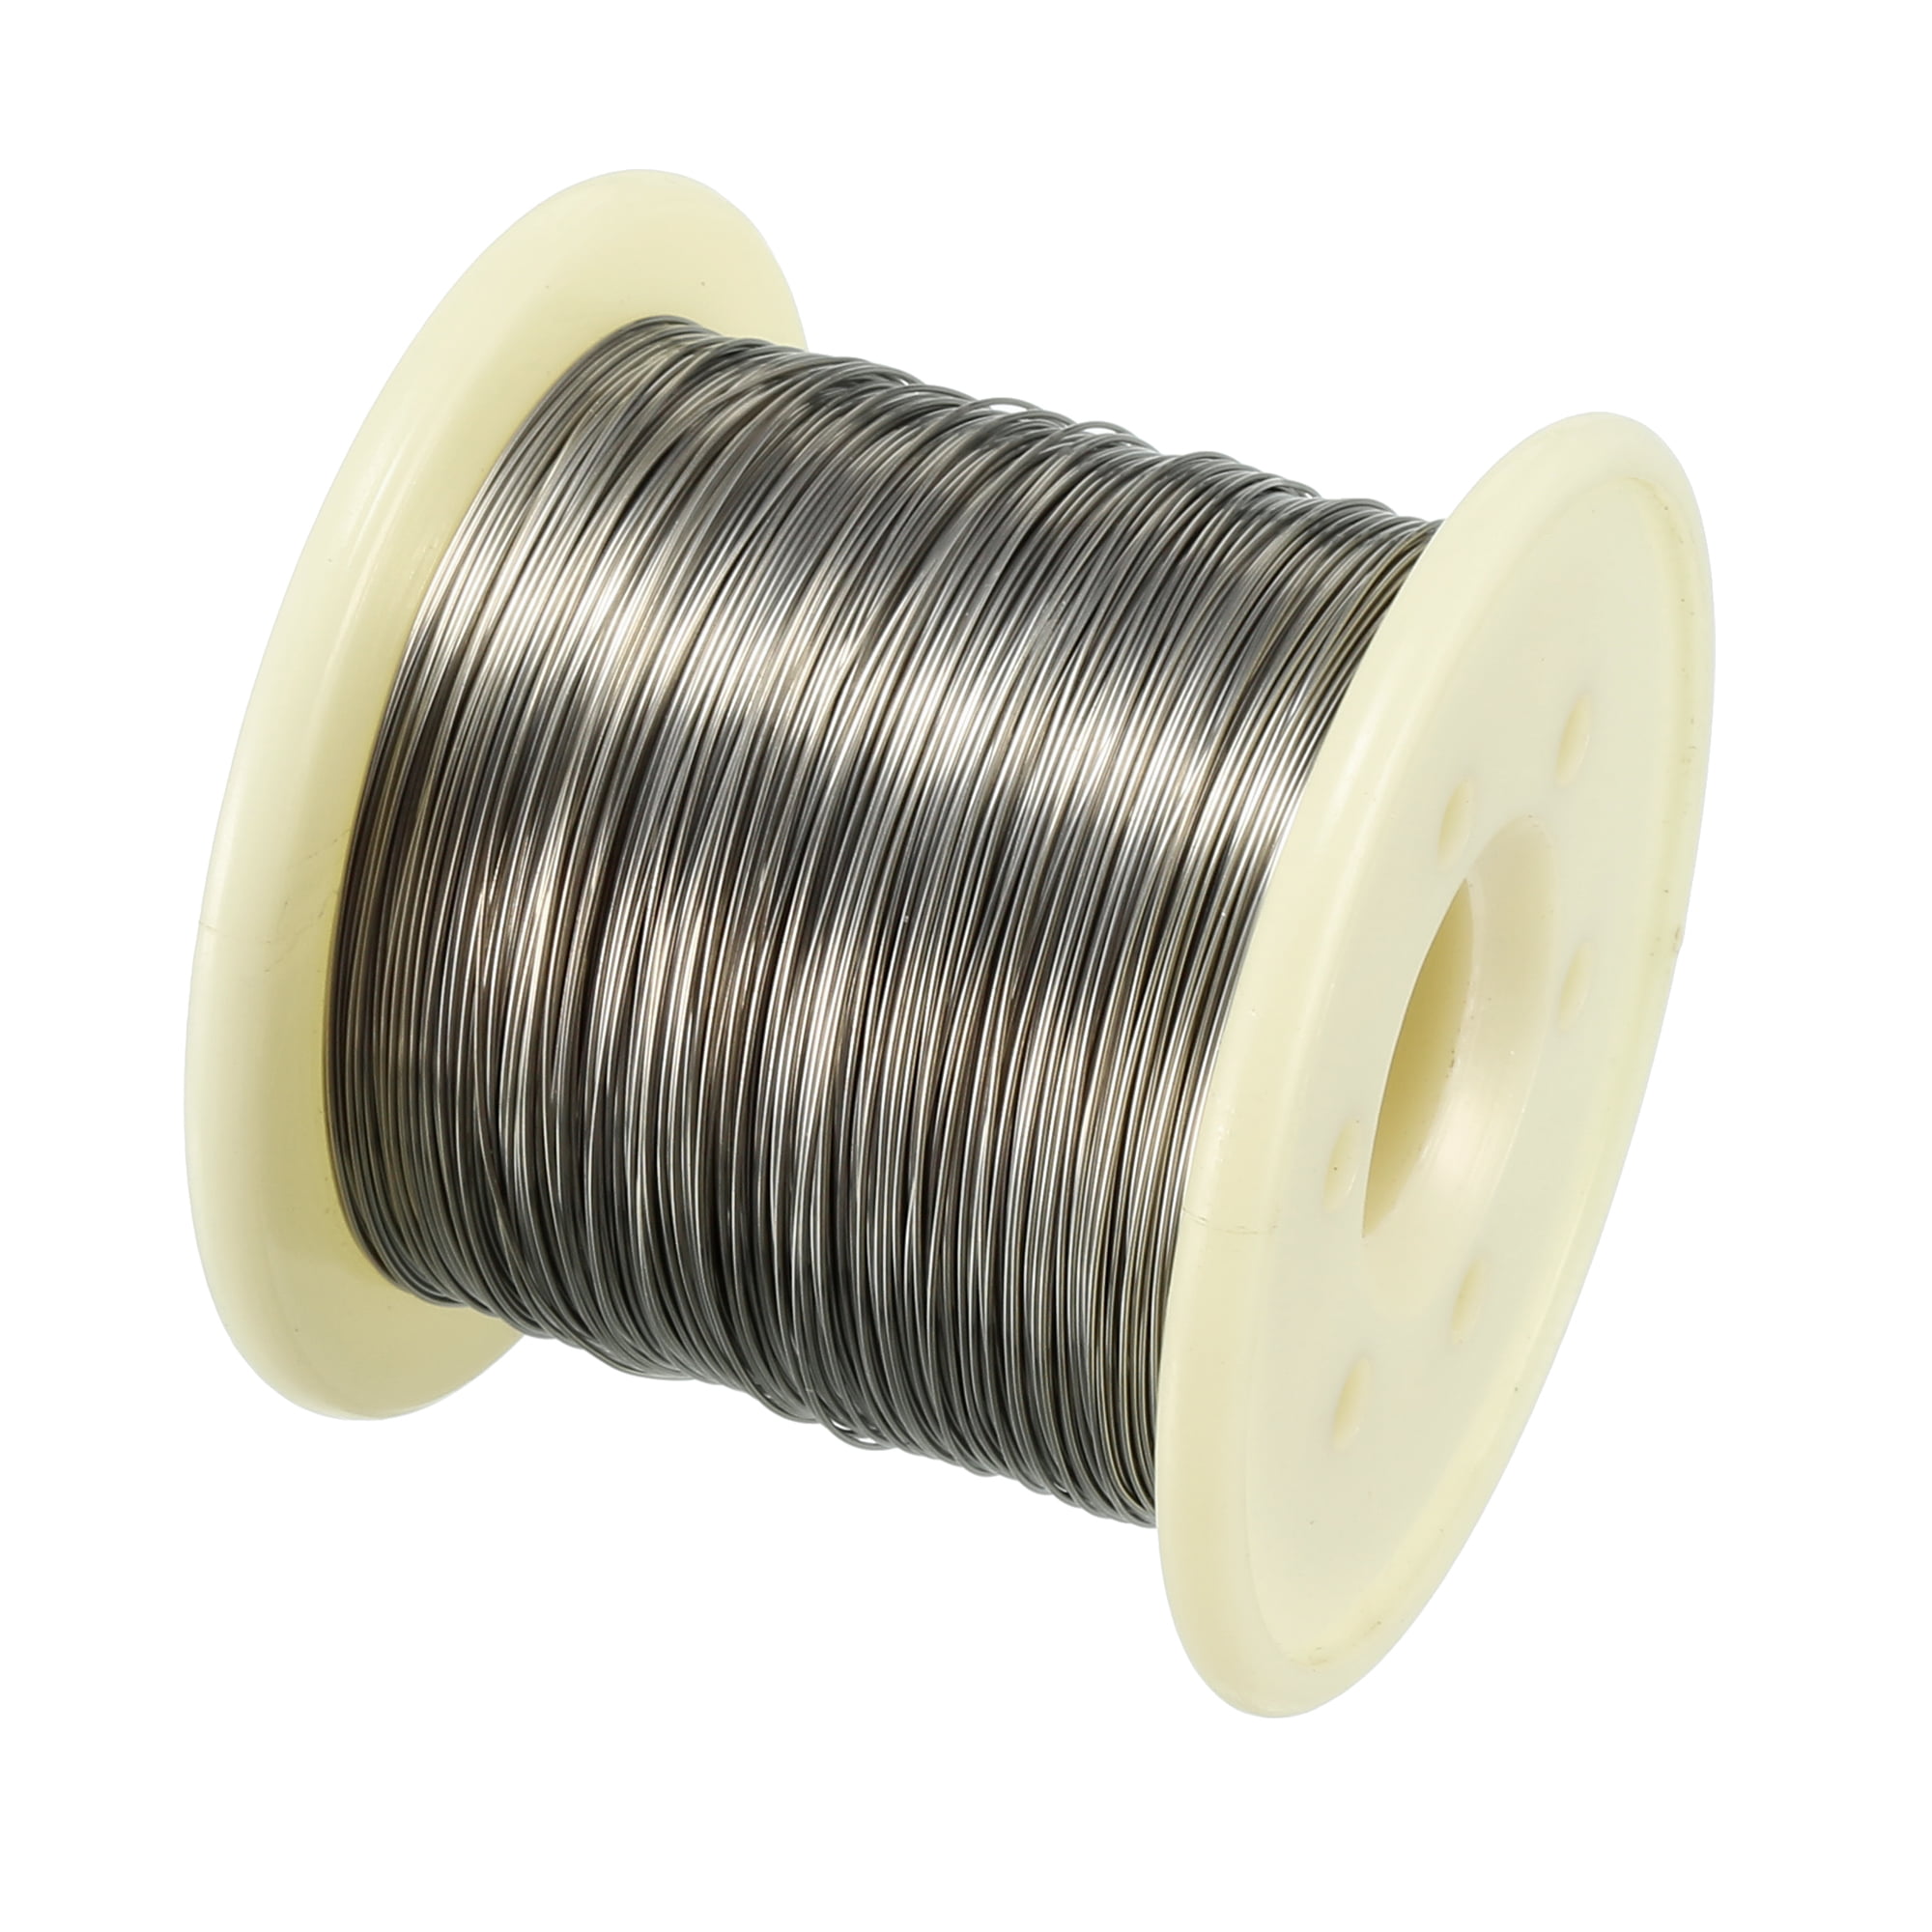 uxcell 0.25mm 30AWG Heating Resistor Wire Wrapping Nichrome Resistance Wires for Heating Elements 33ft 